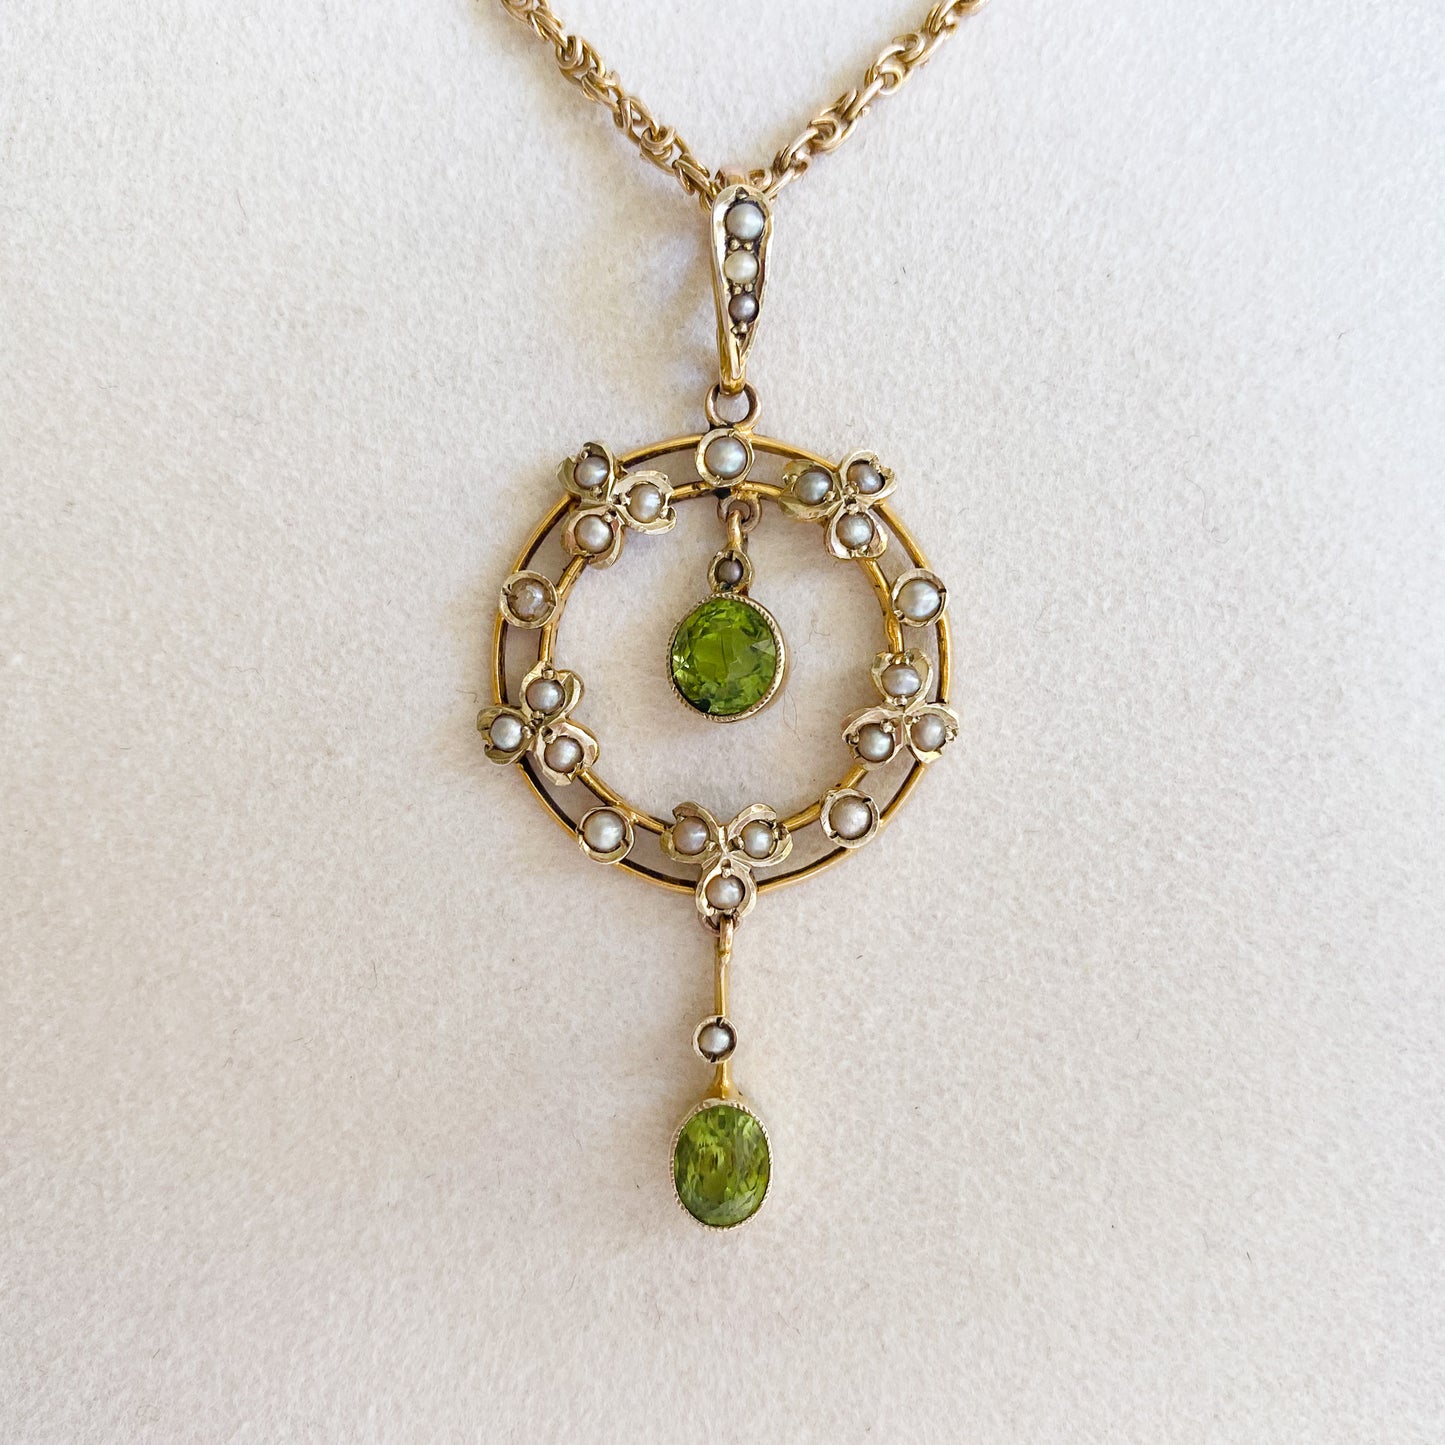 Stunning Edwardian 9ct gold dangling pendant set with two beautifully faceted green peridots and twenty-four tiny seed pearls. On an original 9ct gold fancy link chain. 